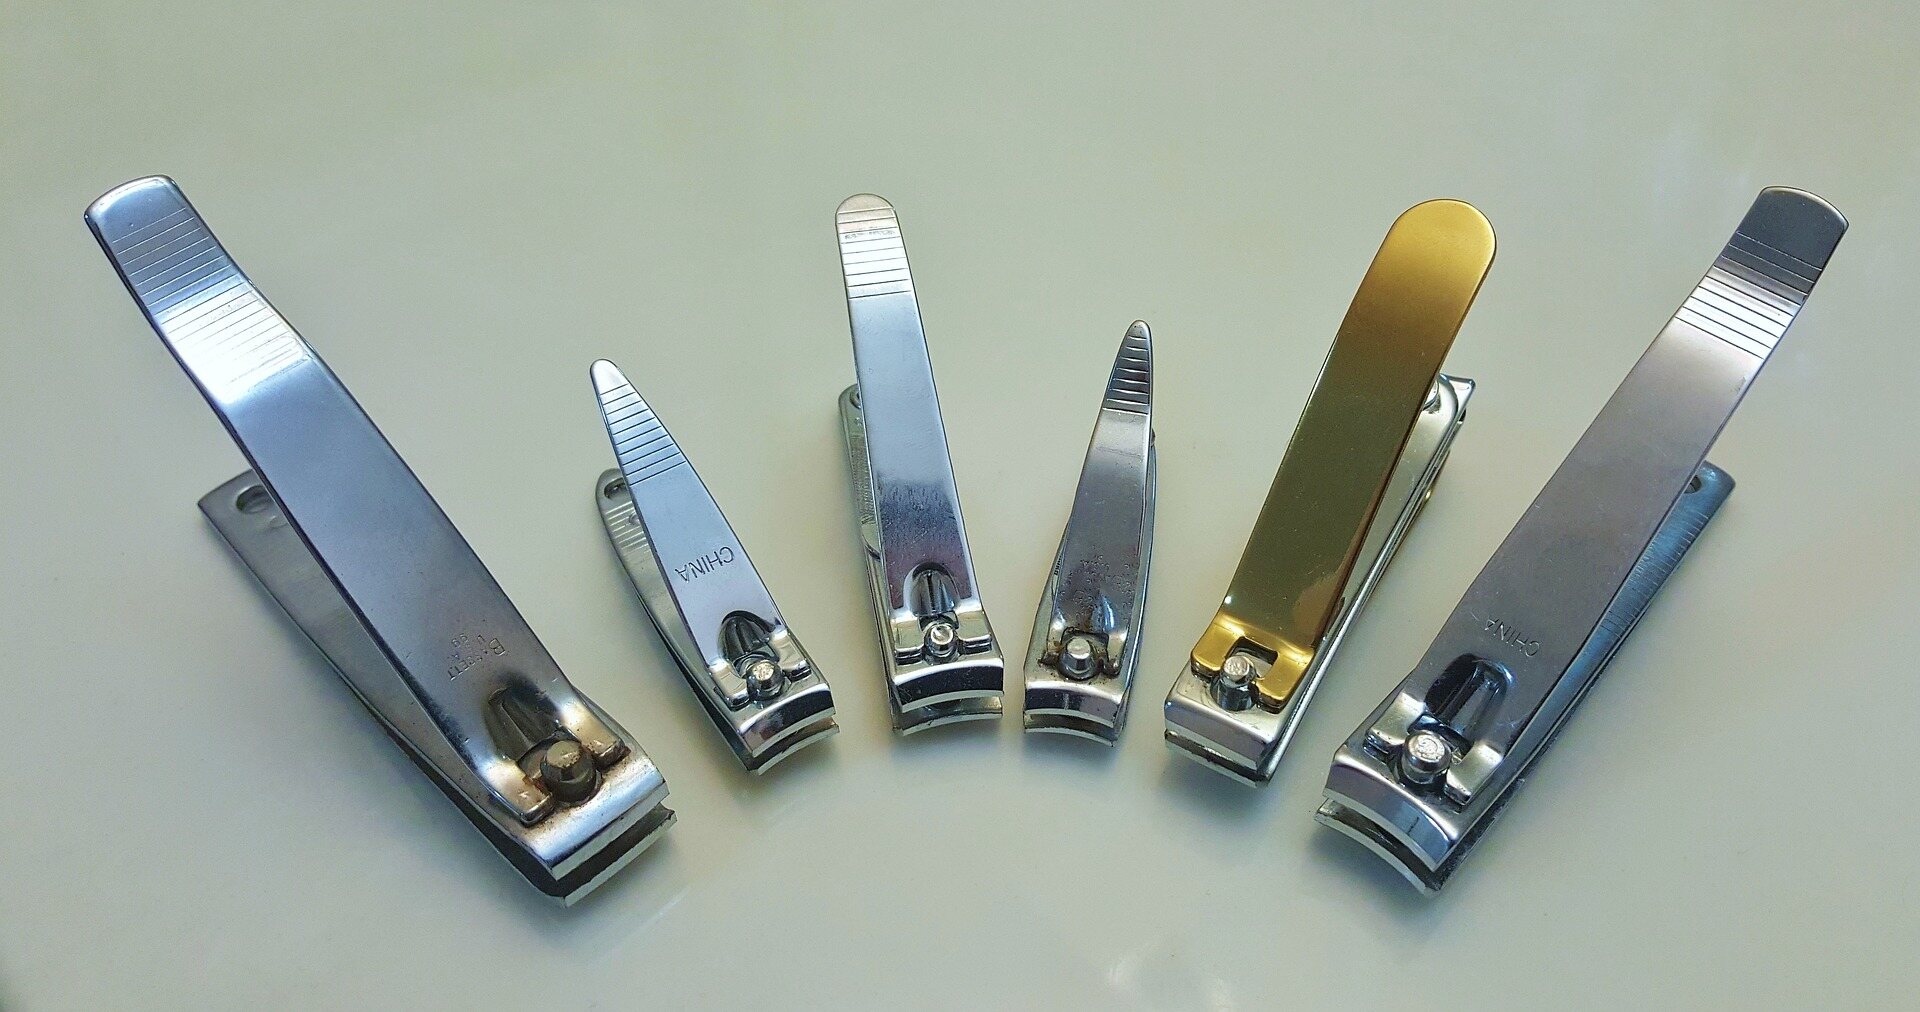 Nail clippers